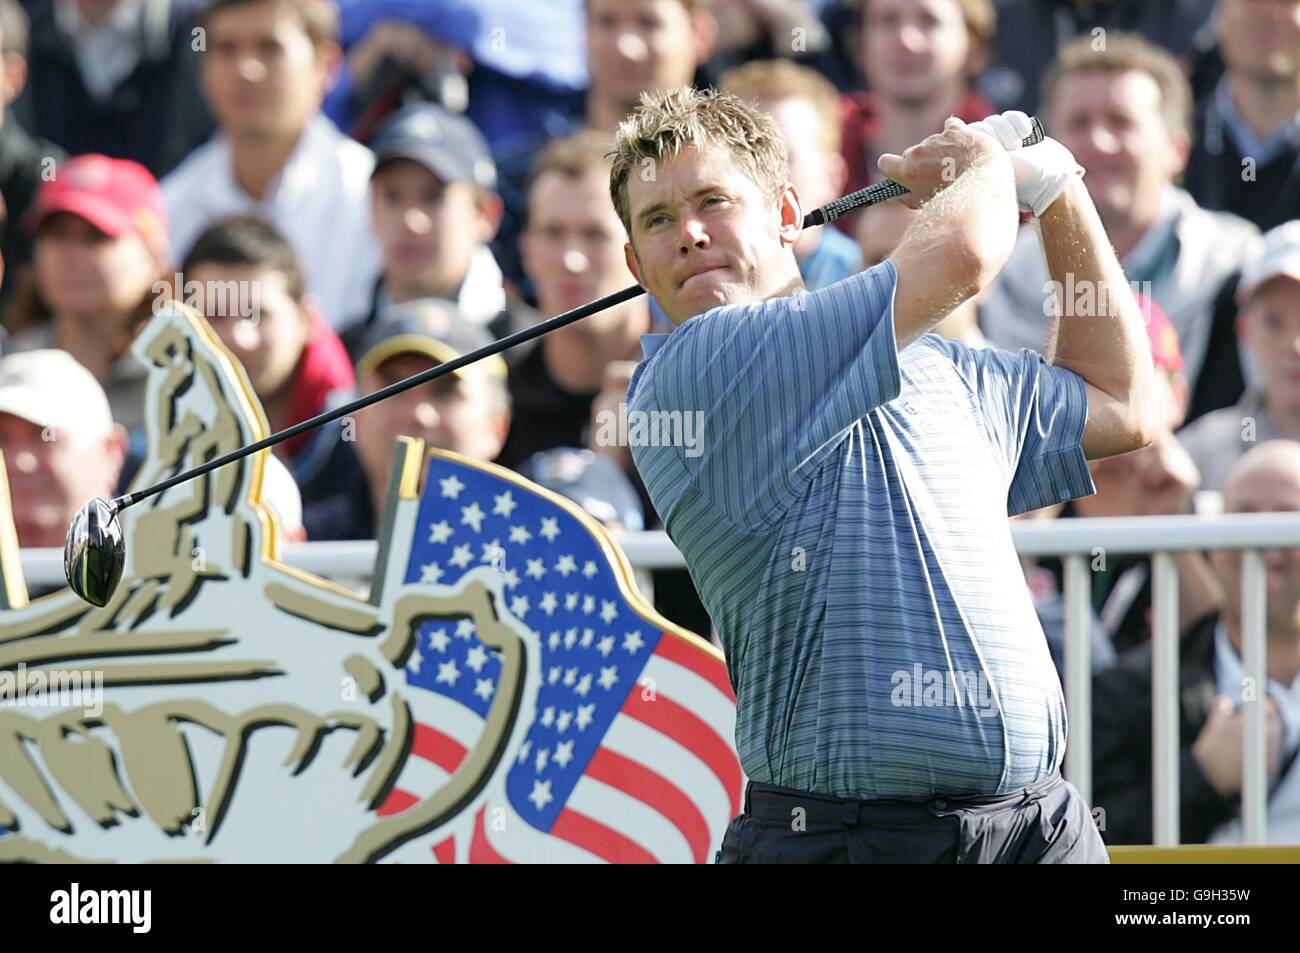 Golf - 36th Ryder Cup - Practice - The K Club. Lee Westwood, Europe Ryder Cup Team. Stock Photo